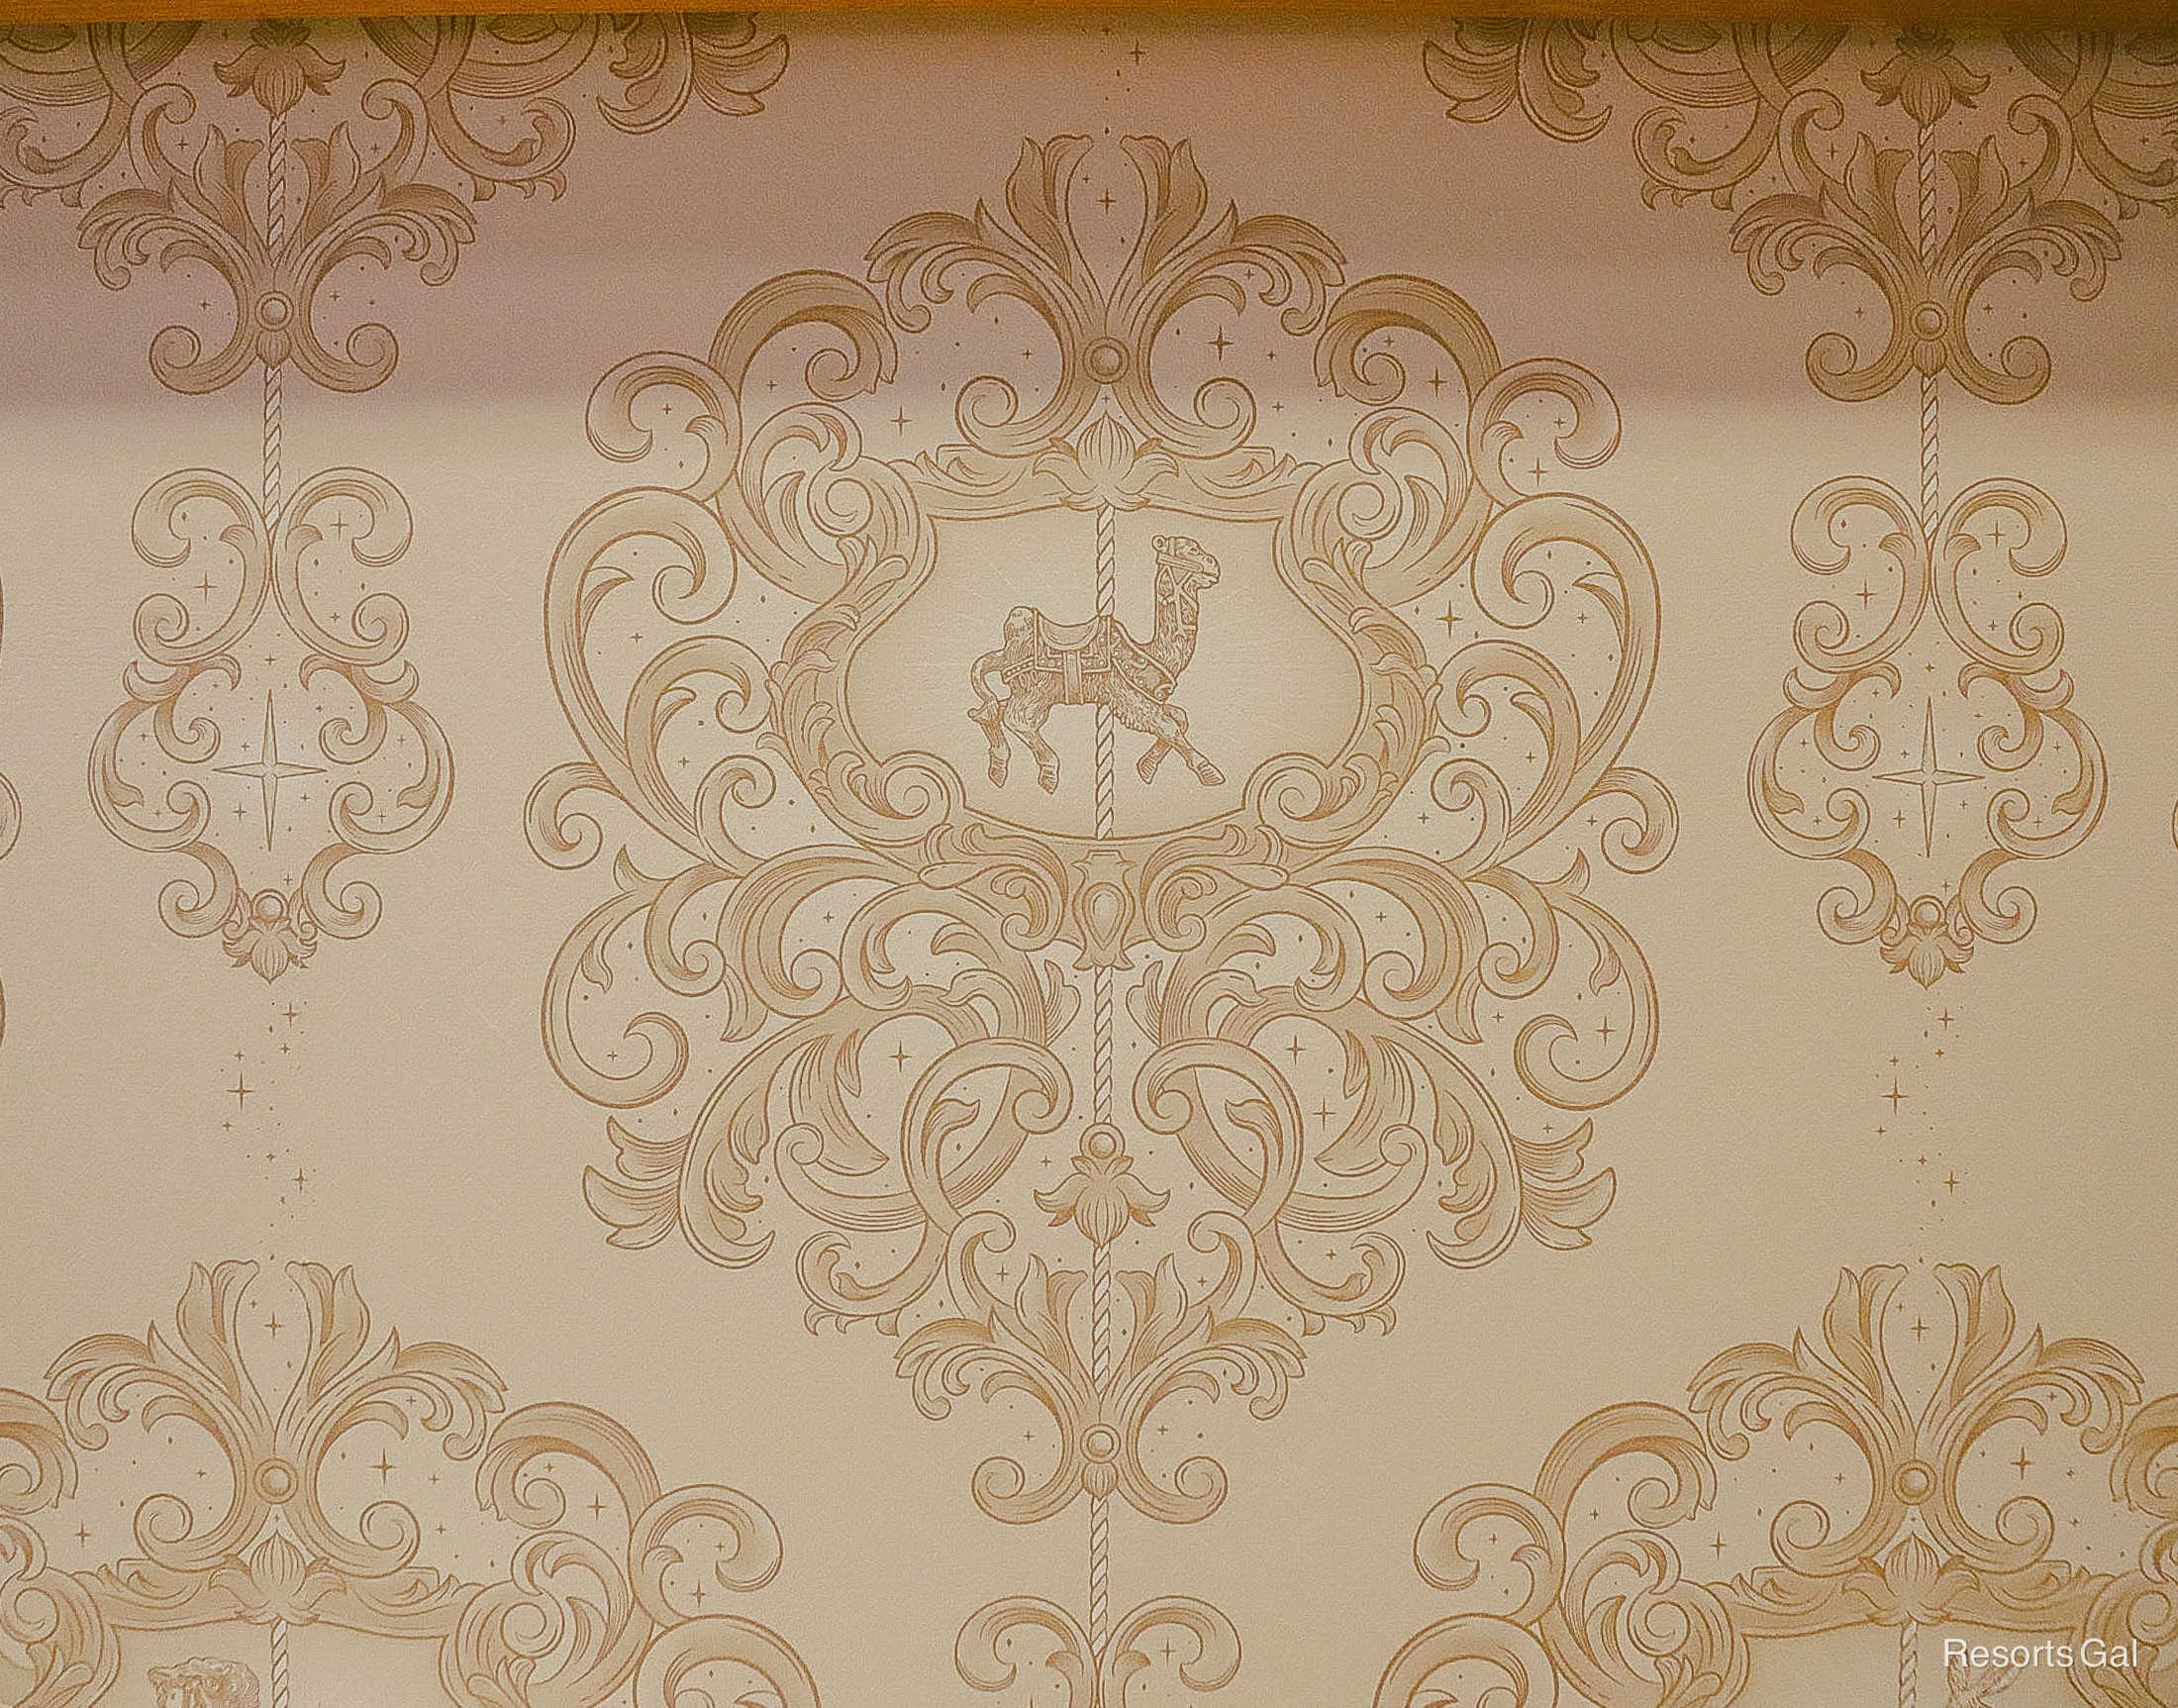 wallpaper with carousel horses and animals at 1900 Park Fare 